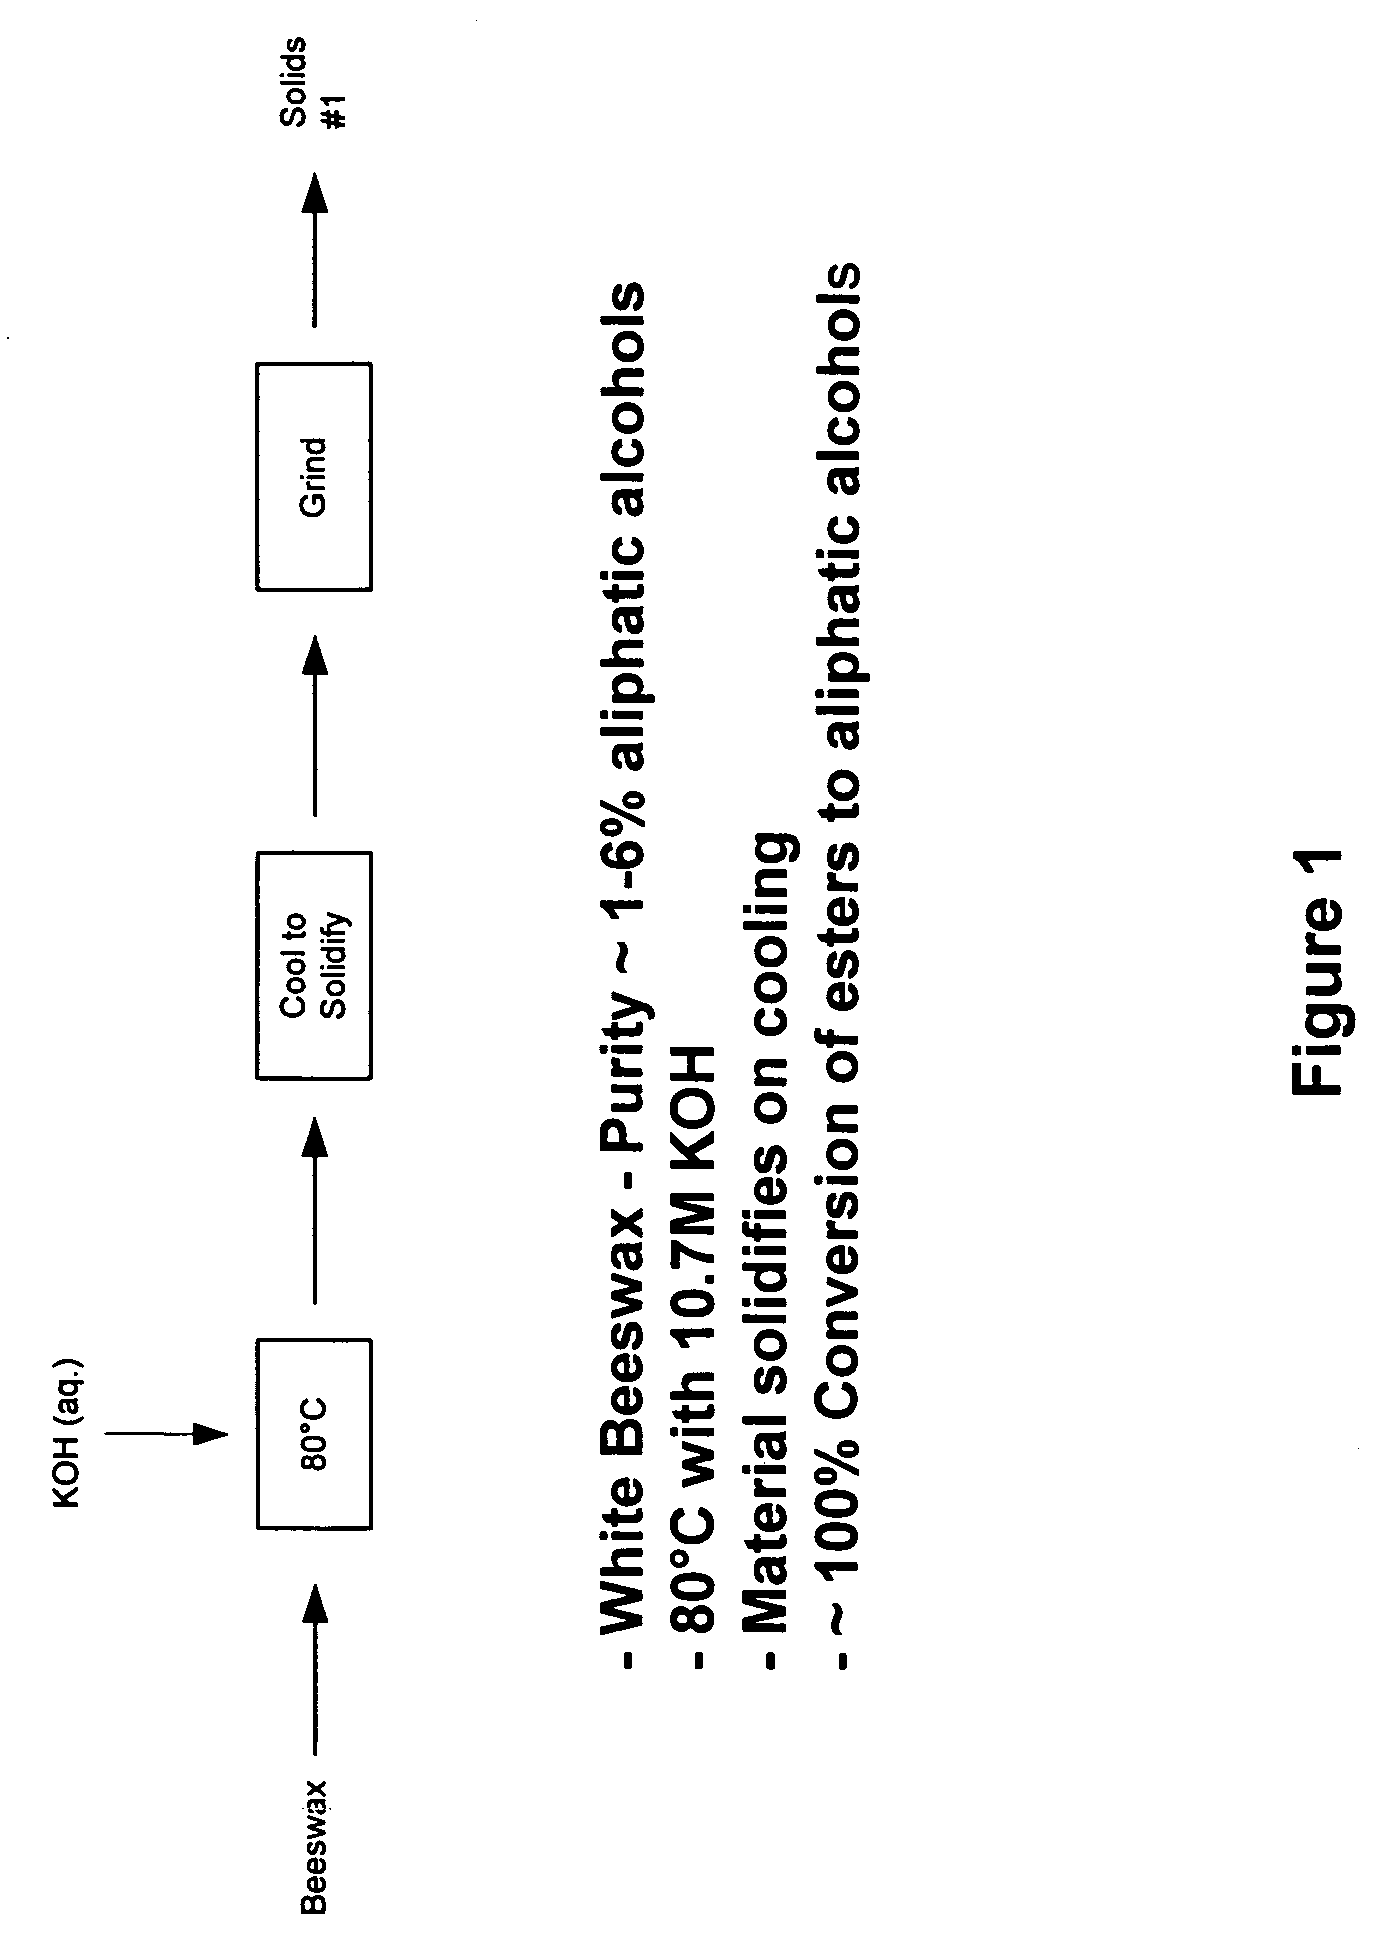 High molecular weight primary aliphatic alcohols obtained from natural products and uses thereof